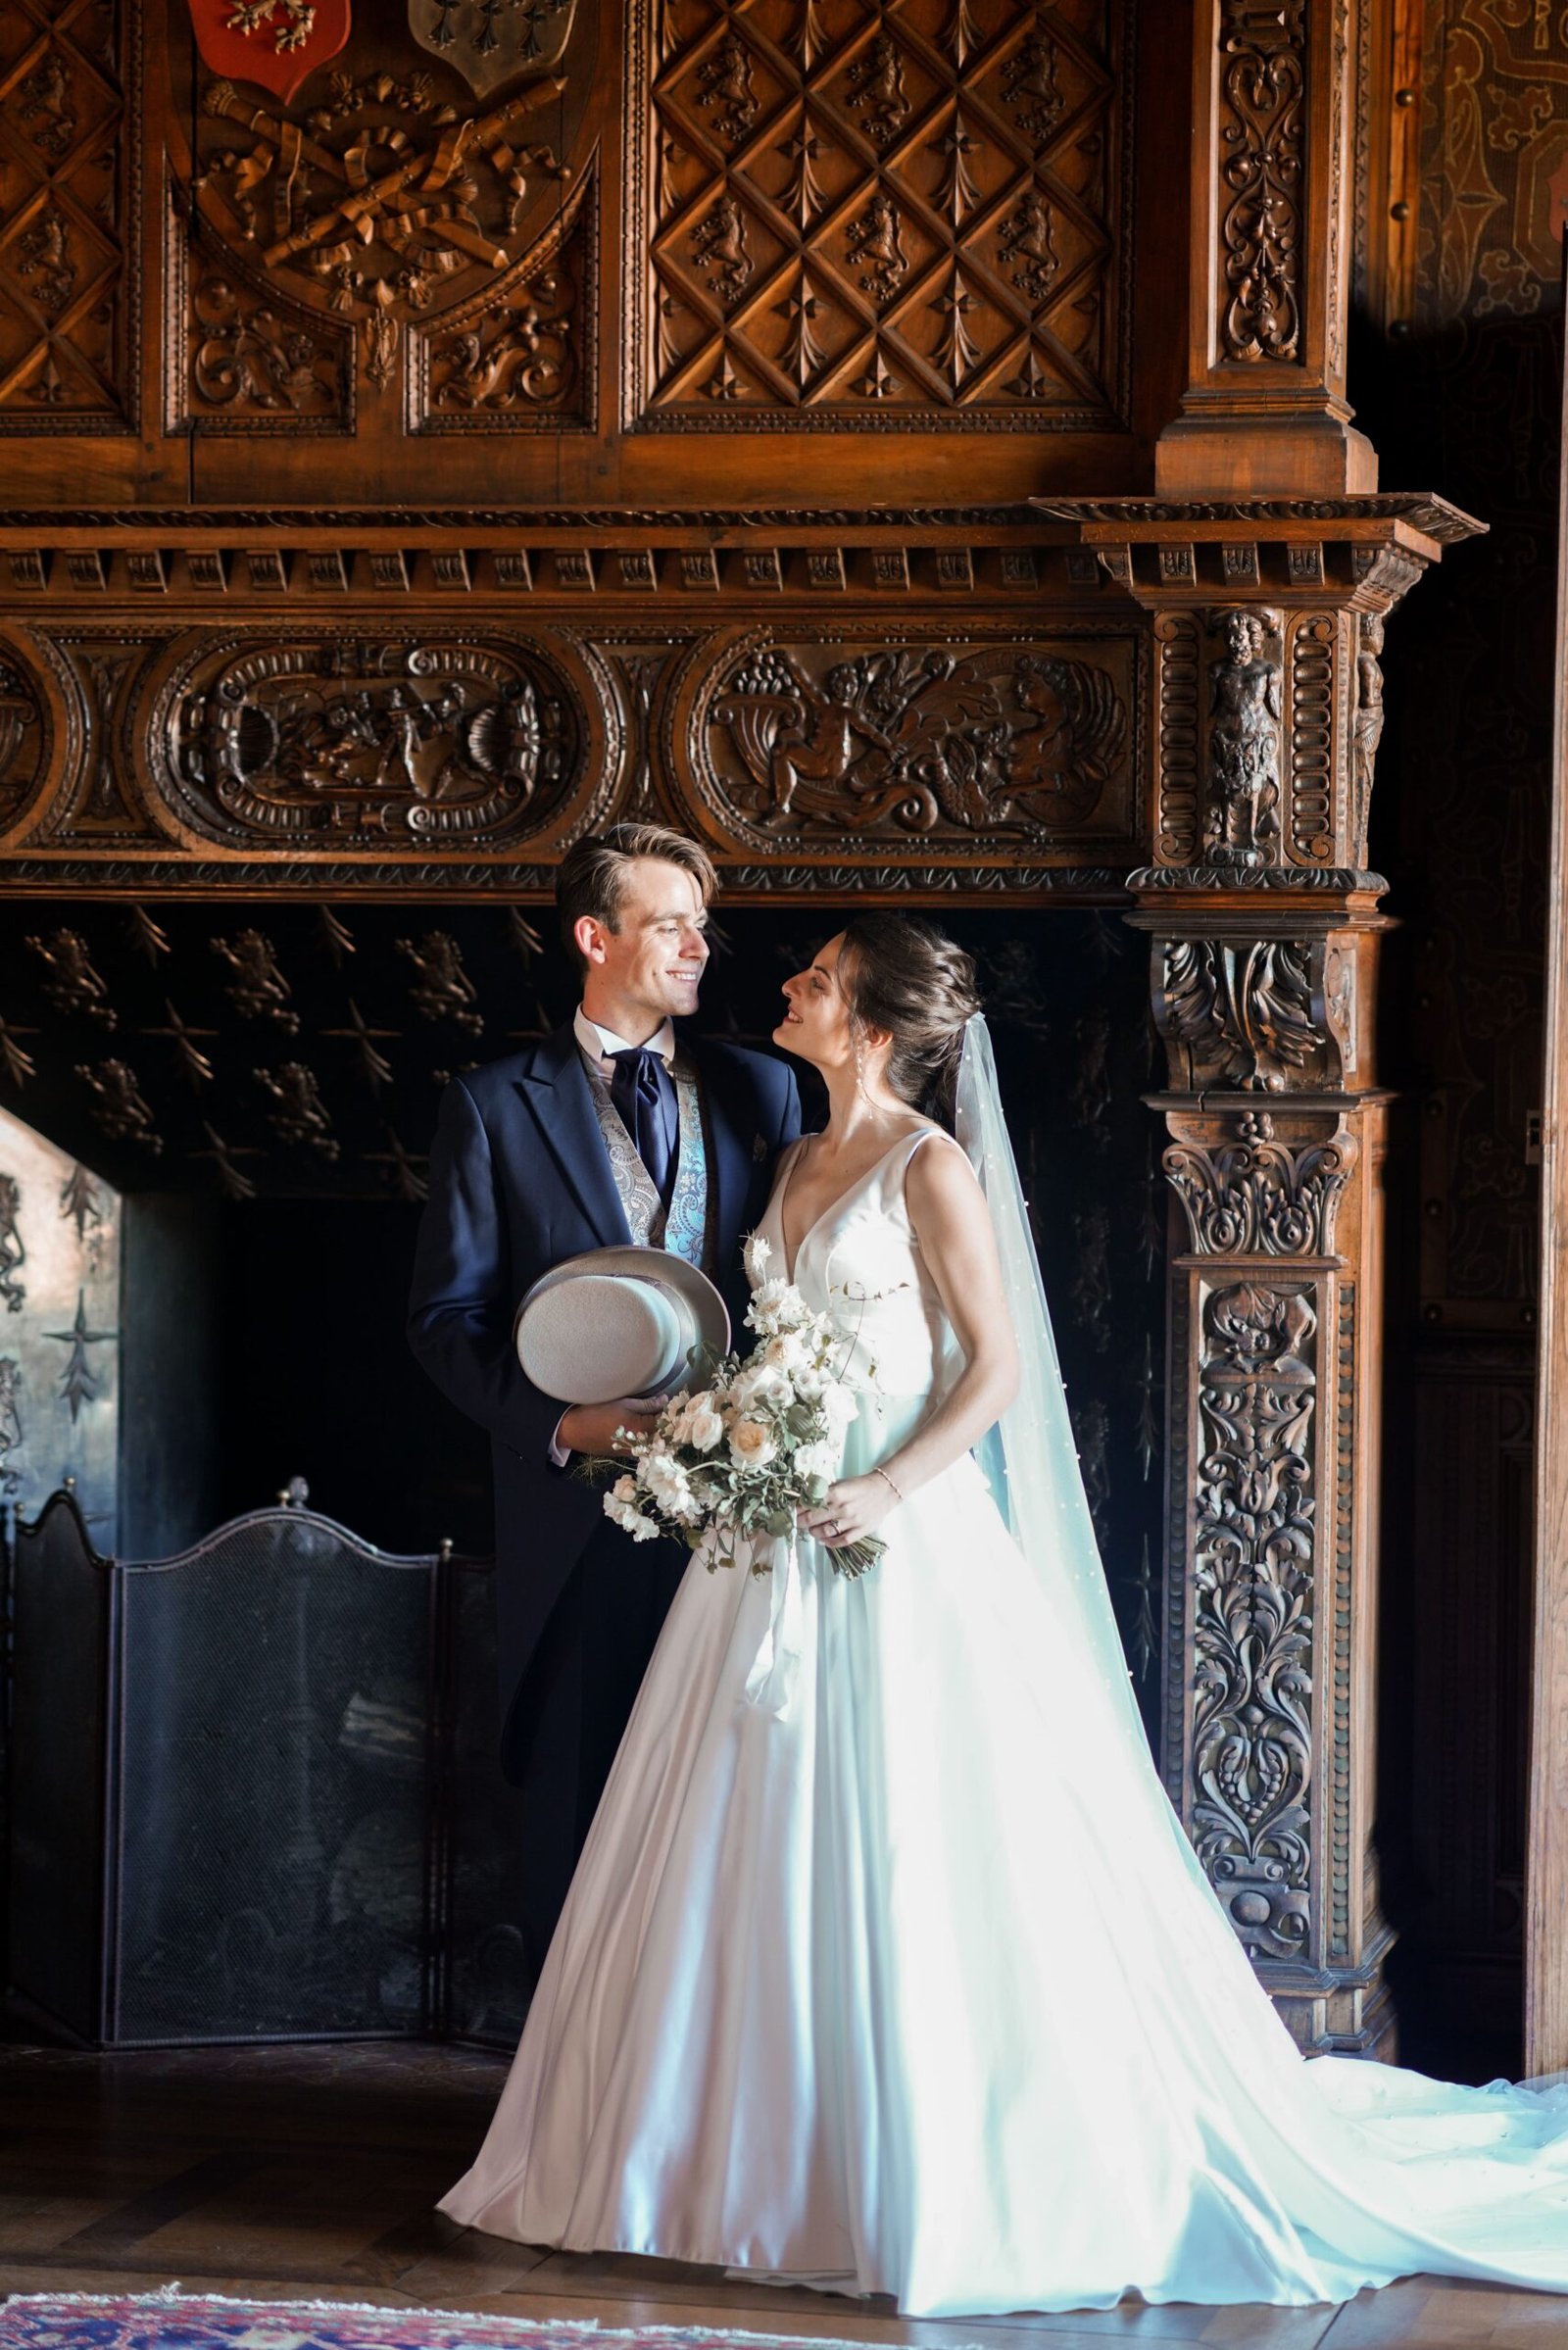 FRENCH ELEGANCE: MASTERING THE SUBTLE DETAILS OF YOUR FRENCH DESTINATION WEDDING